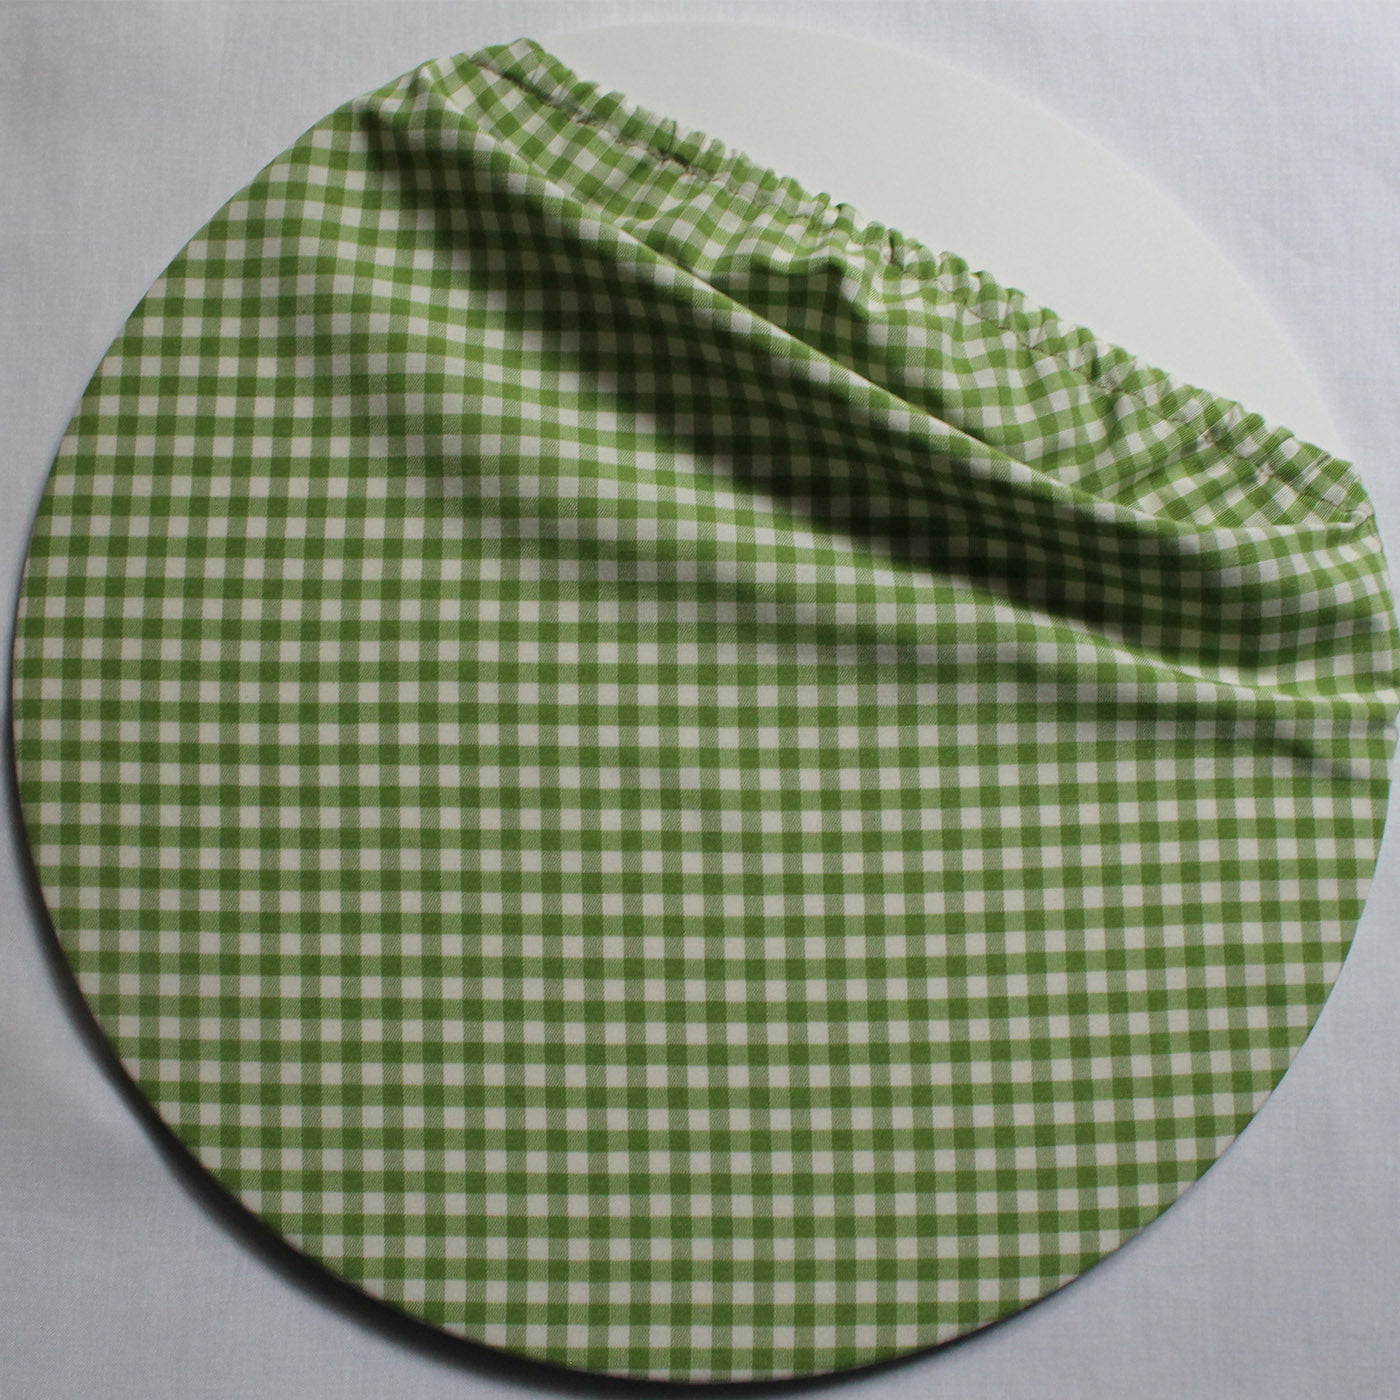 Cuffiette Green and White Placemat - Alternative view 1